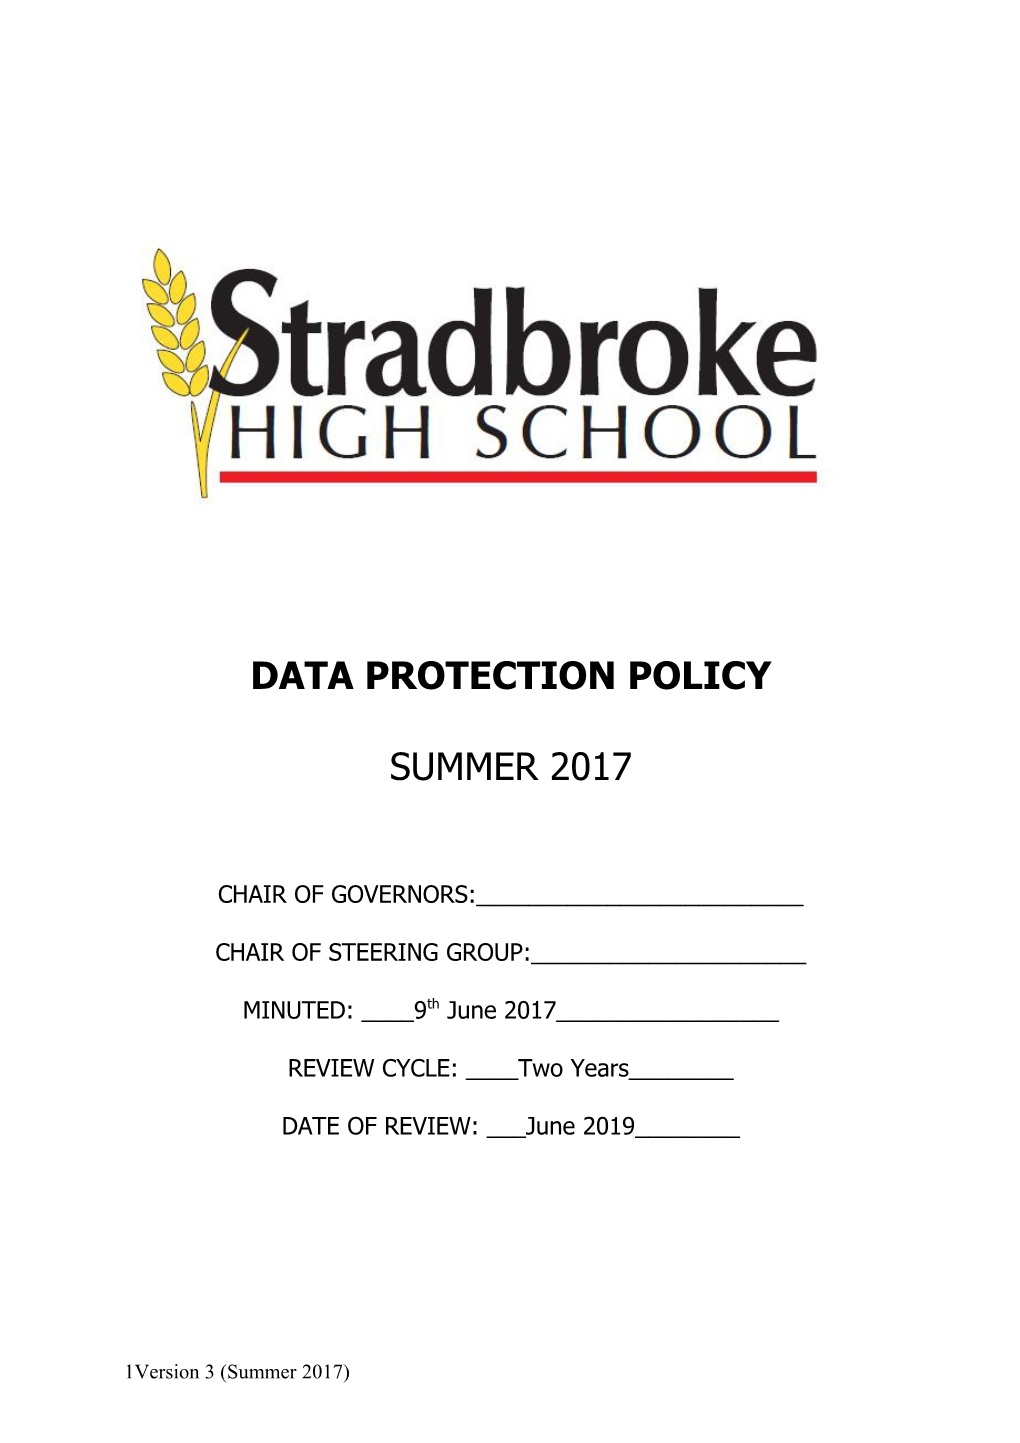 Data Protection Policy s2